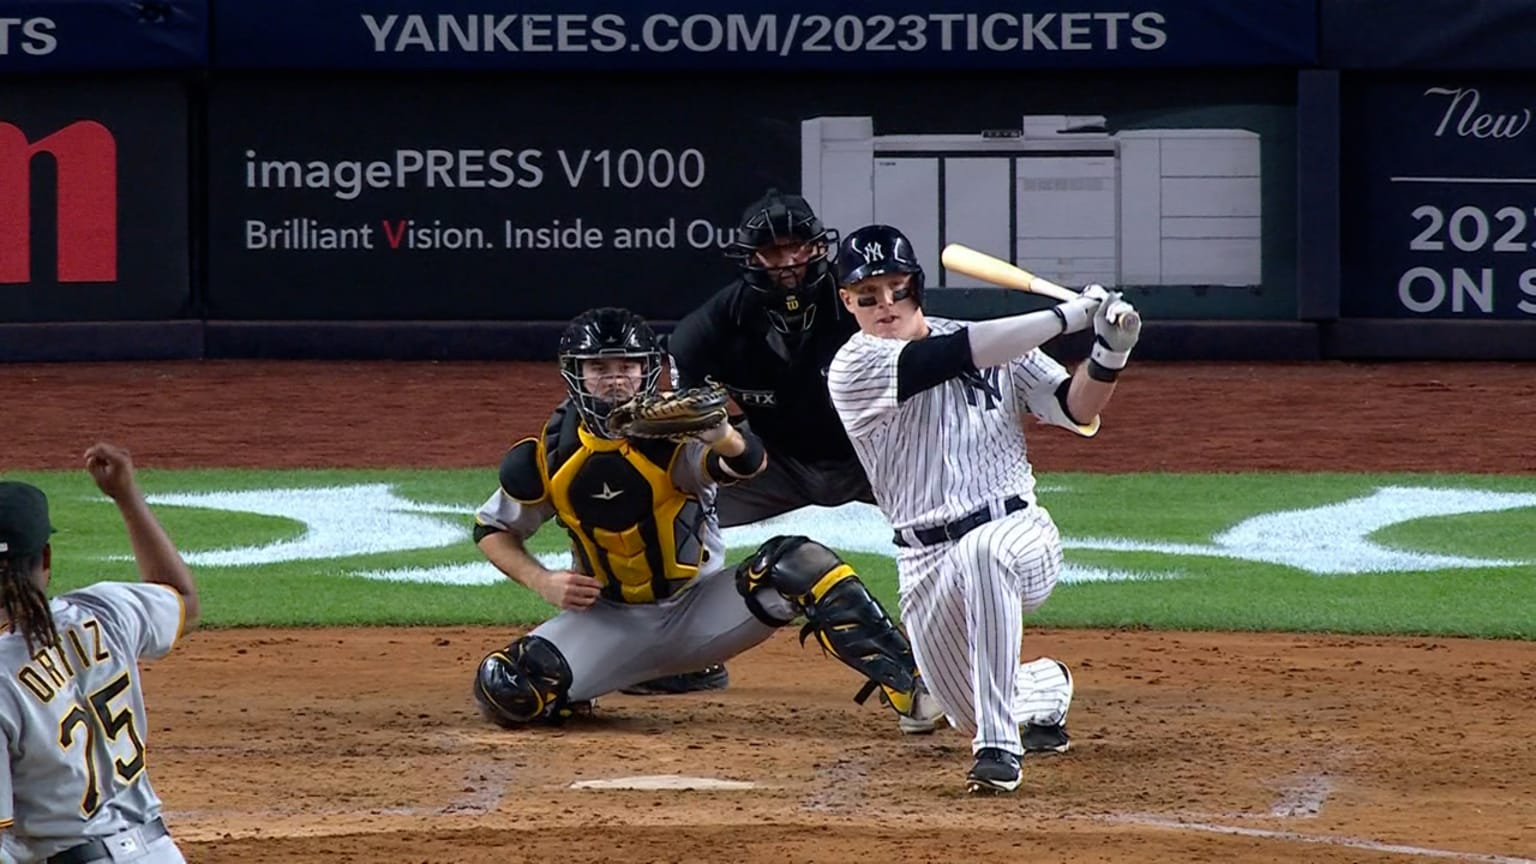 WATCH: Bader RBI Single Gives Yankees Lead in First Game with New